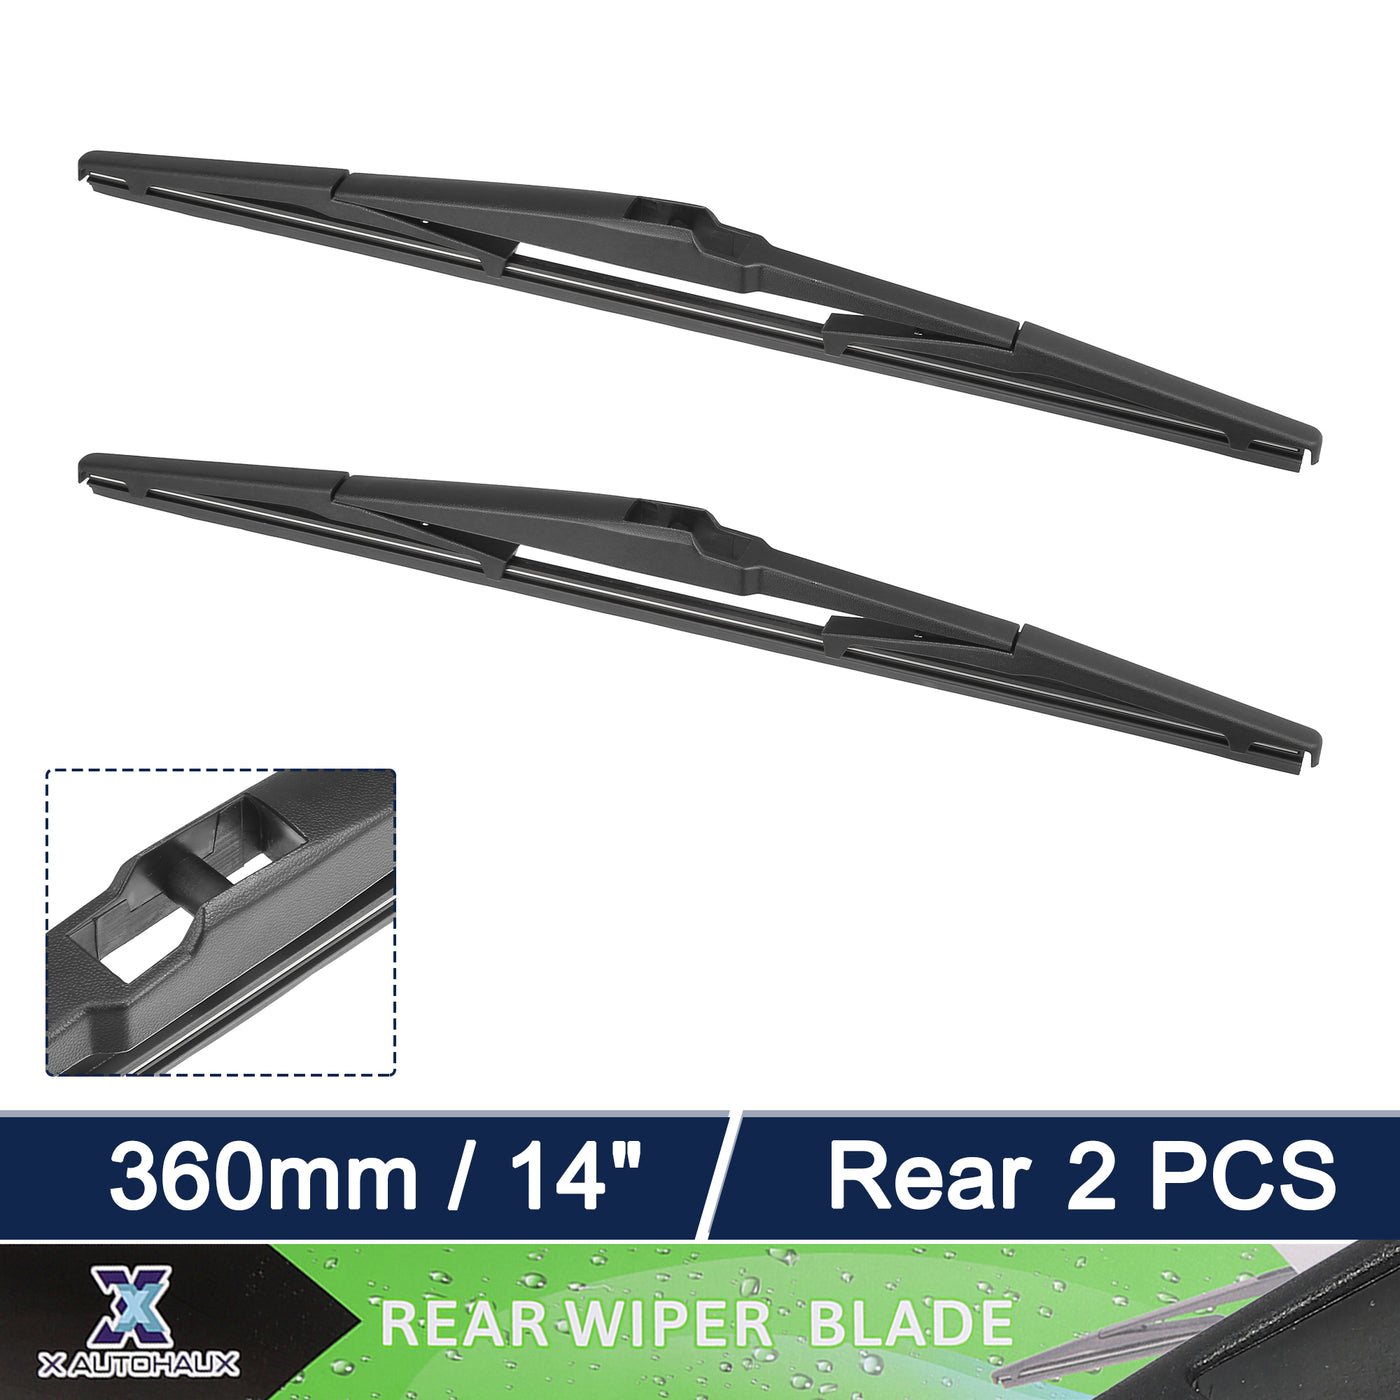 X AUTOHAUX 2pcs Rear Windshield Wiper Blade Replacement for Hyundai Santa Fe 2006-2012 for Kia Carens 2006-2012 for Mazda CX-5 2011-2019